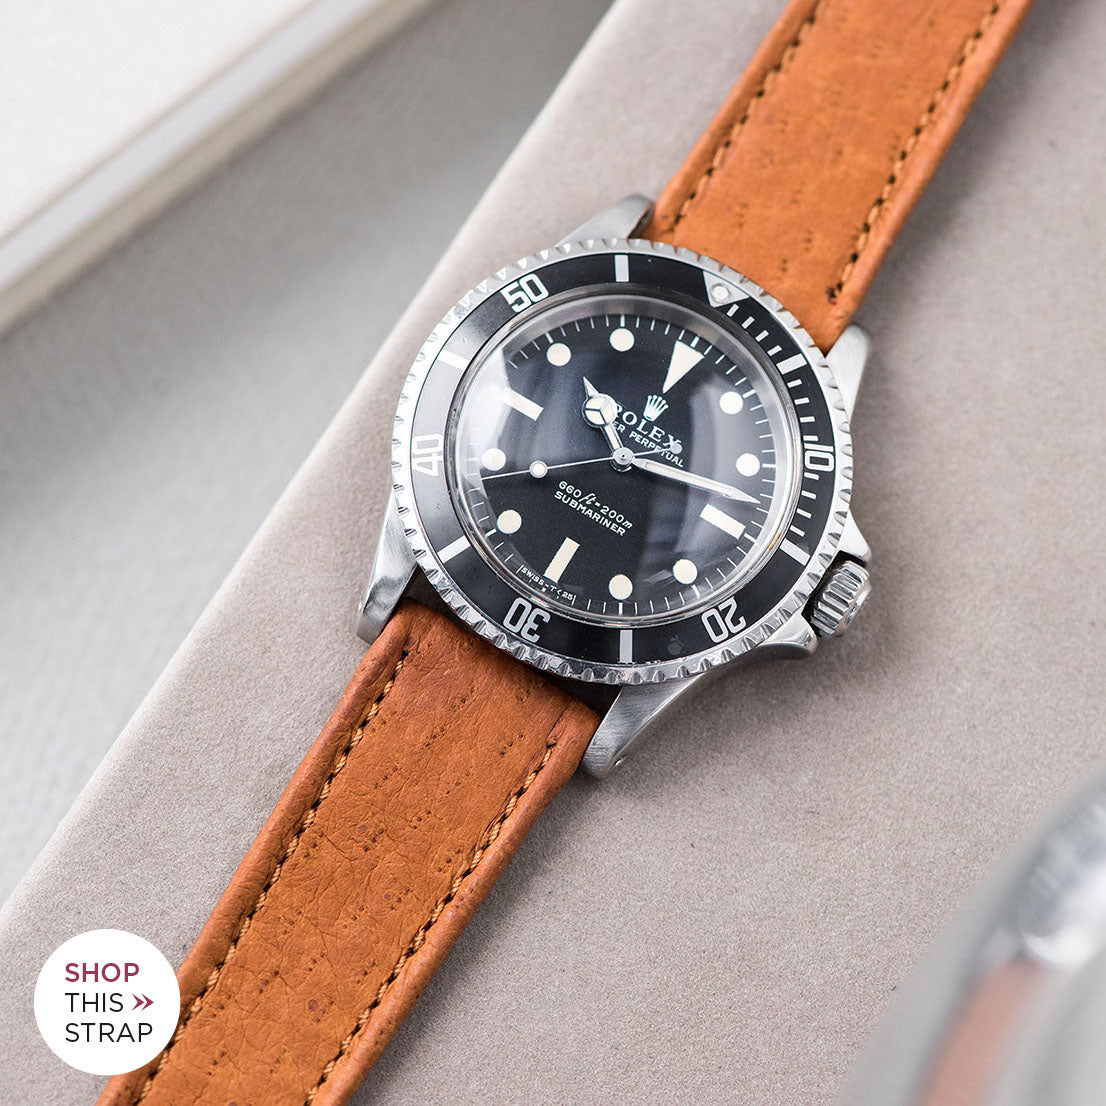 Bulang and Sons_Strap Guide_The Rolex 5513 Black Submariner_Peccary Brown Heritage Leather Watch Strap